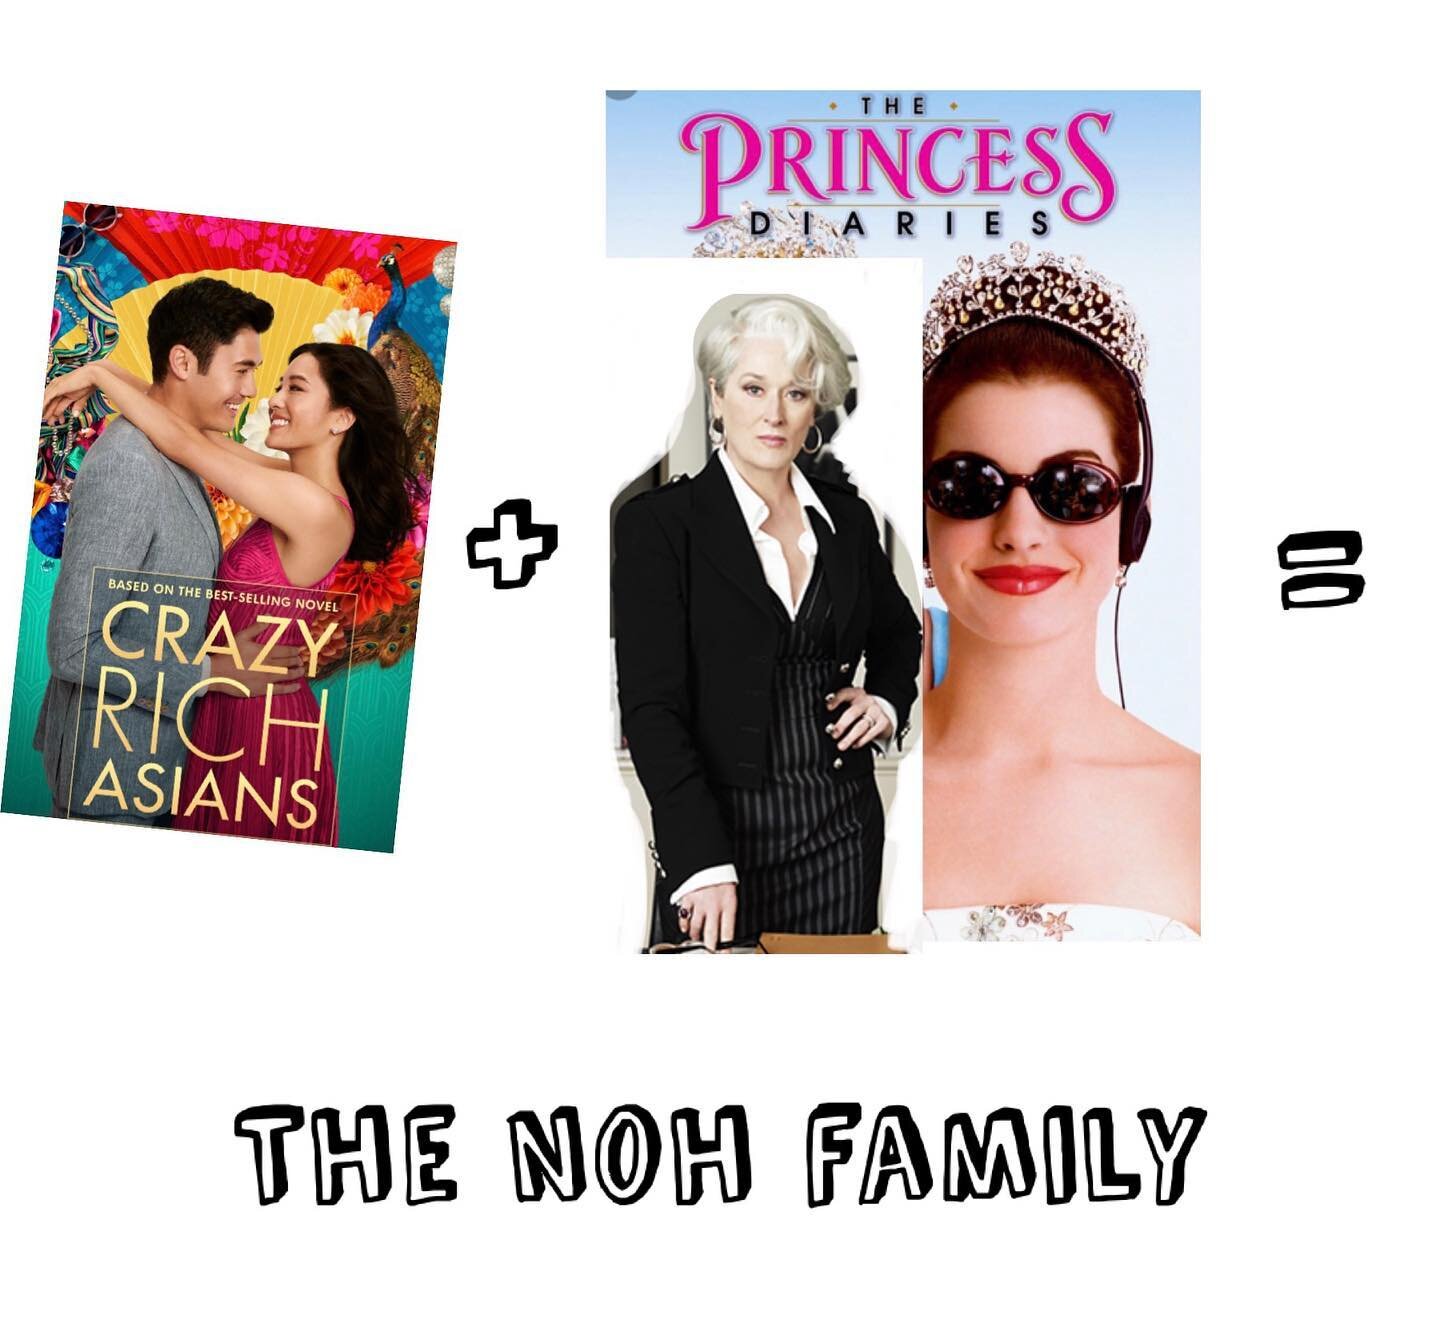 ✨ It&rsquo;s day SIXTEEN of #meetthe22debuts ✨ 

Today&rsquo;s prompt: TV/ movie comp for your book

My book was pitched as Crazy Rich Asians meets The Princess Diaries with Miranda Priestly as the grandmother. (Don&rsquo;t be jealous of my mad photo